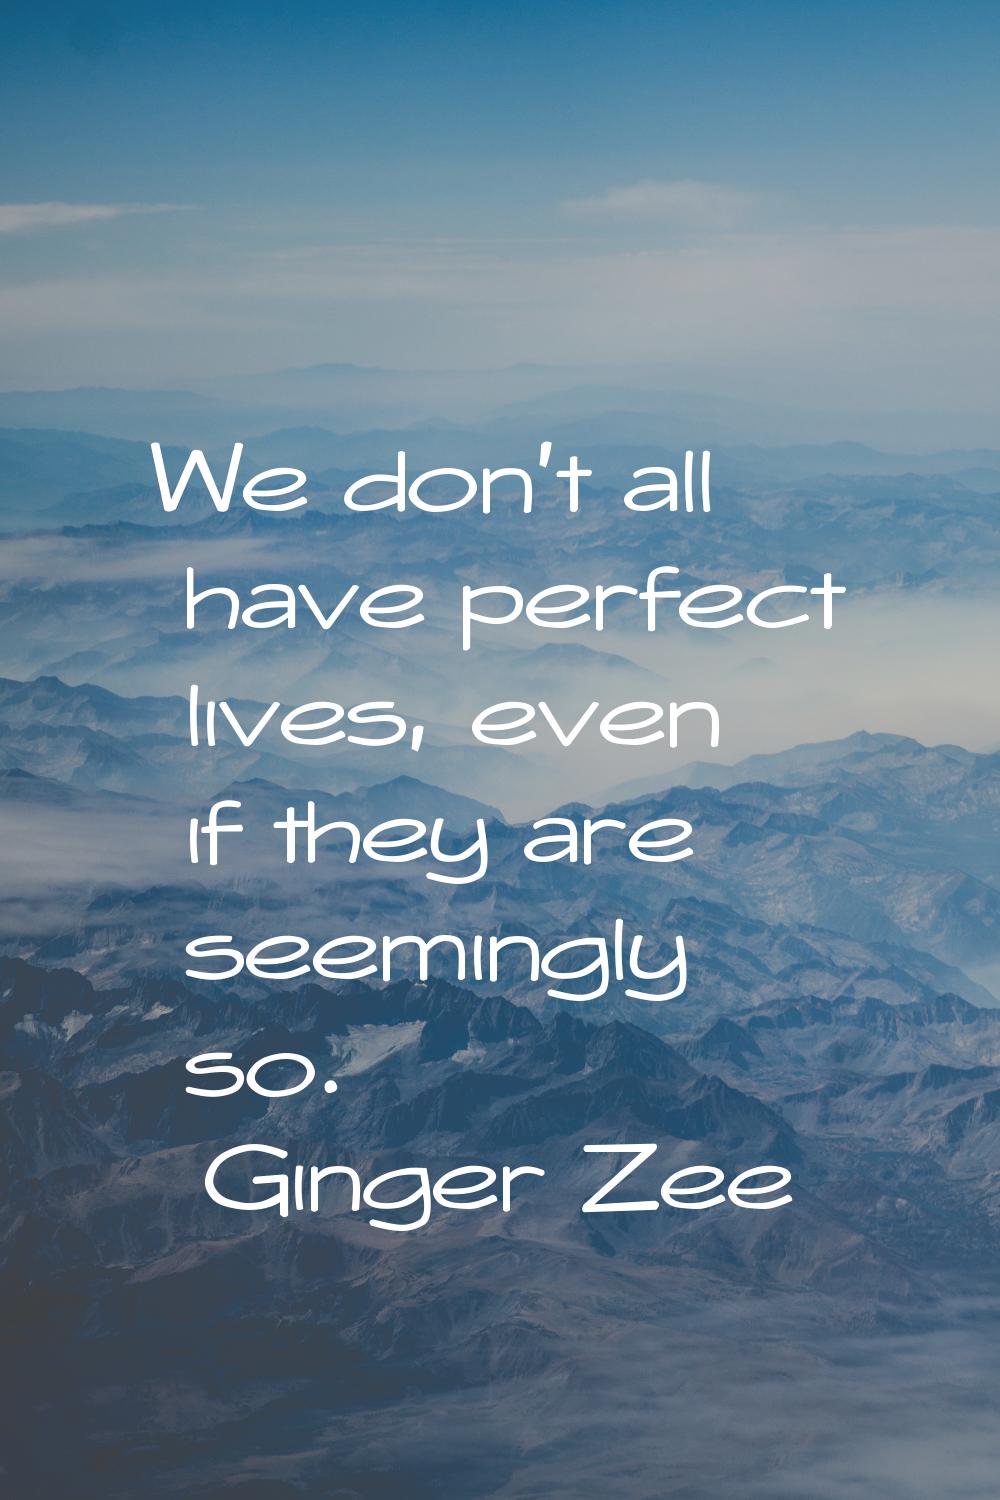 We don't all have perfect lives, even if they are seemingly so.